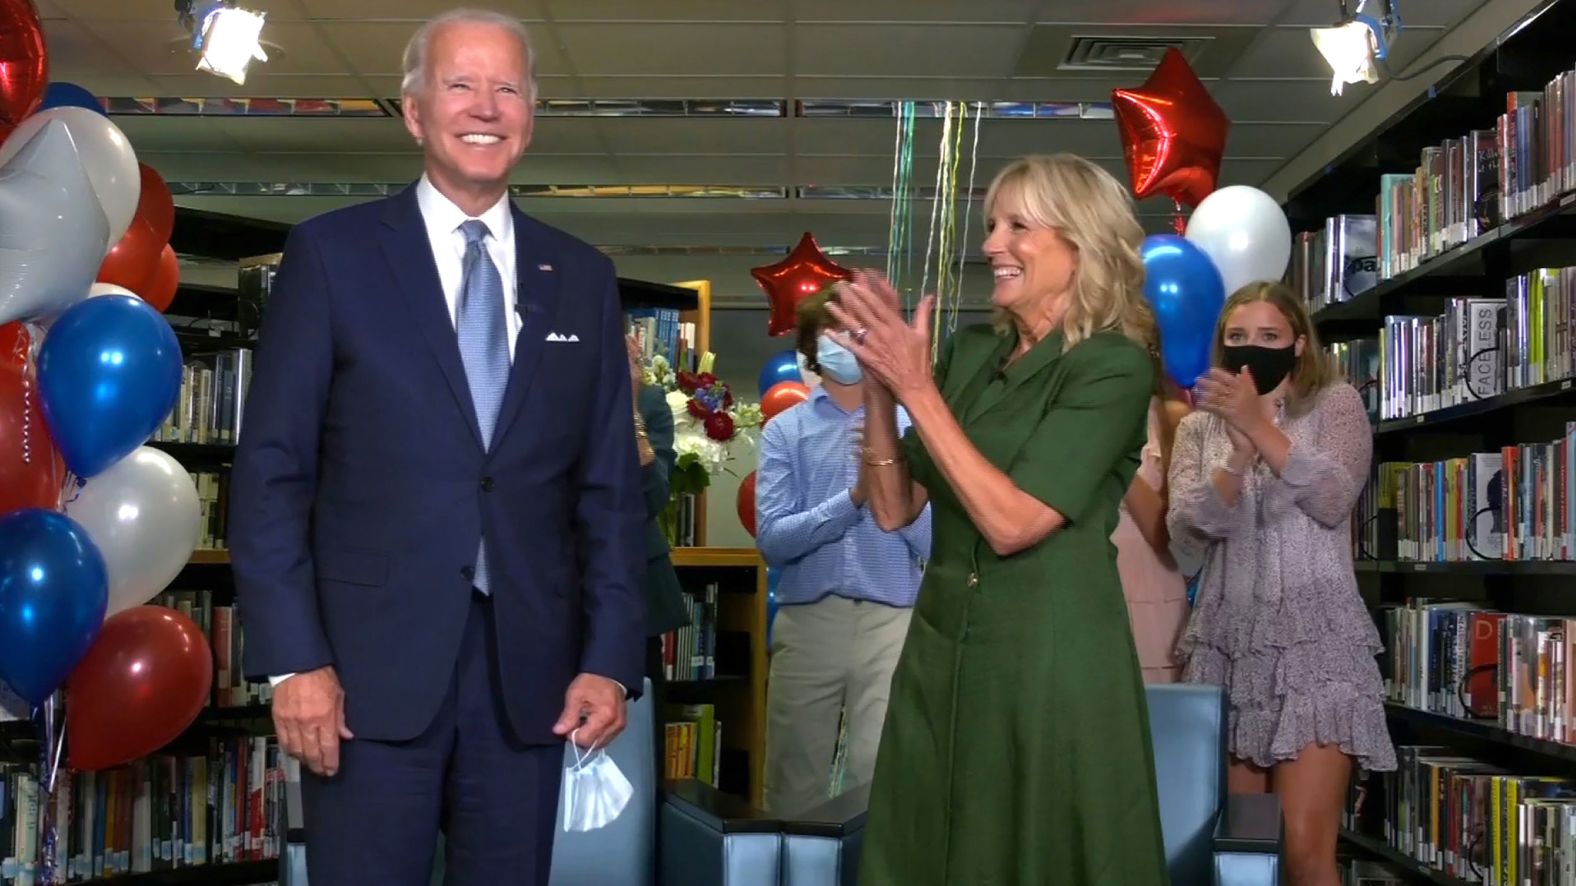 Jill Biden claps for her husband after he <a href="index.php?page=&url=https%3A%2F%2Fwww.cnn.com%2Fpolitics%2Flive-news%2Fdnc-2020-day-2%2Fh_b715ace734f88da814b7afb7733471d9" target="_blank">was officially nominated </a>on Tuesday.  His grandchildren shot celebratory streamers behind him. "Thank you all from the bottom of my heart from my family, and I'll see you on Thursday," Biden said, referring to his upcoming speech to close the convention.